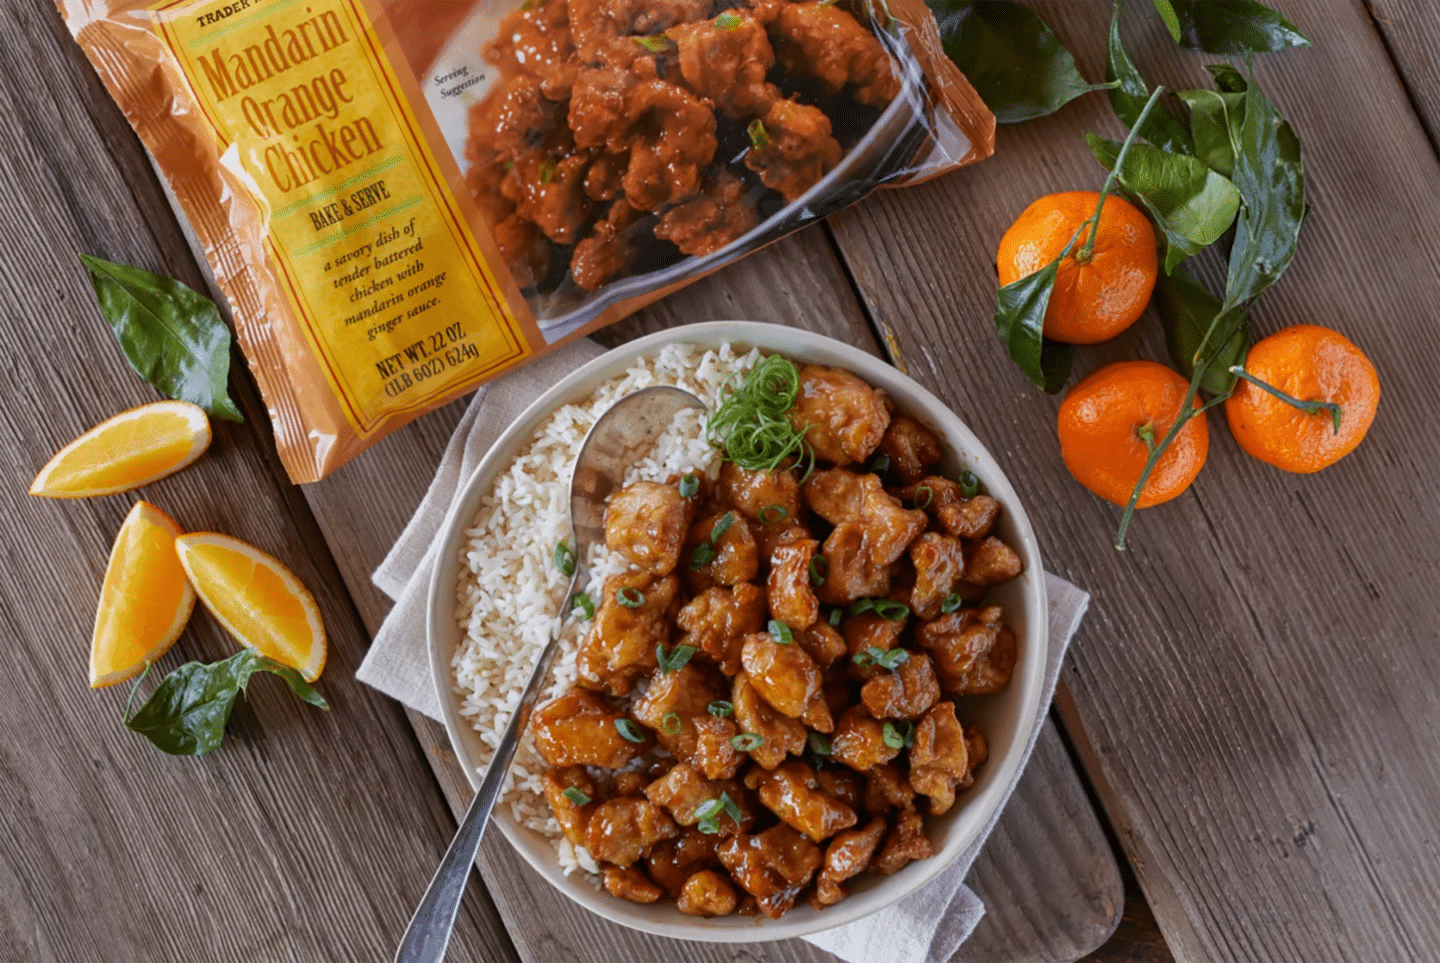 Level up the orange chicken Trader Joe's meal, by food blogger What The Fab